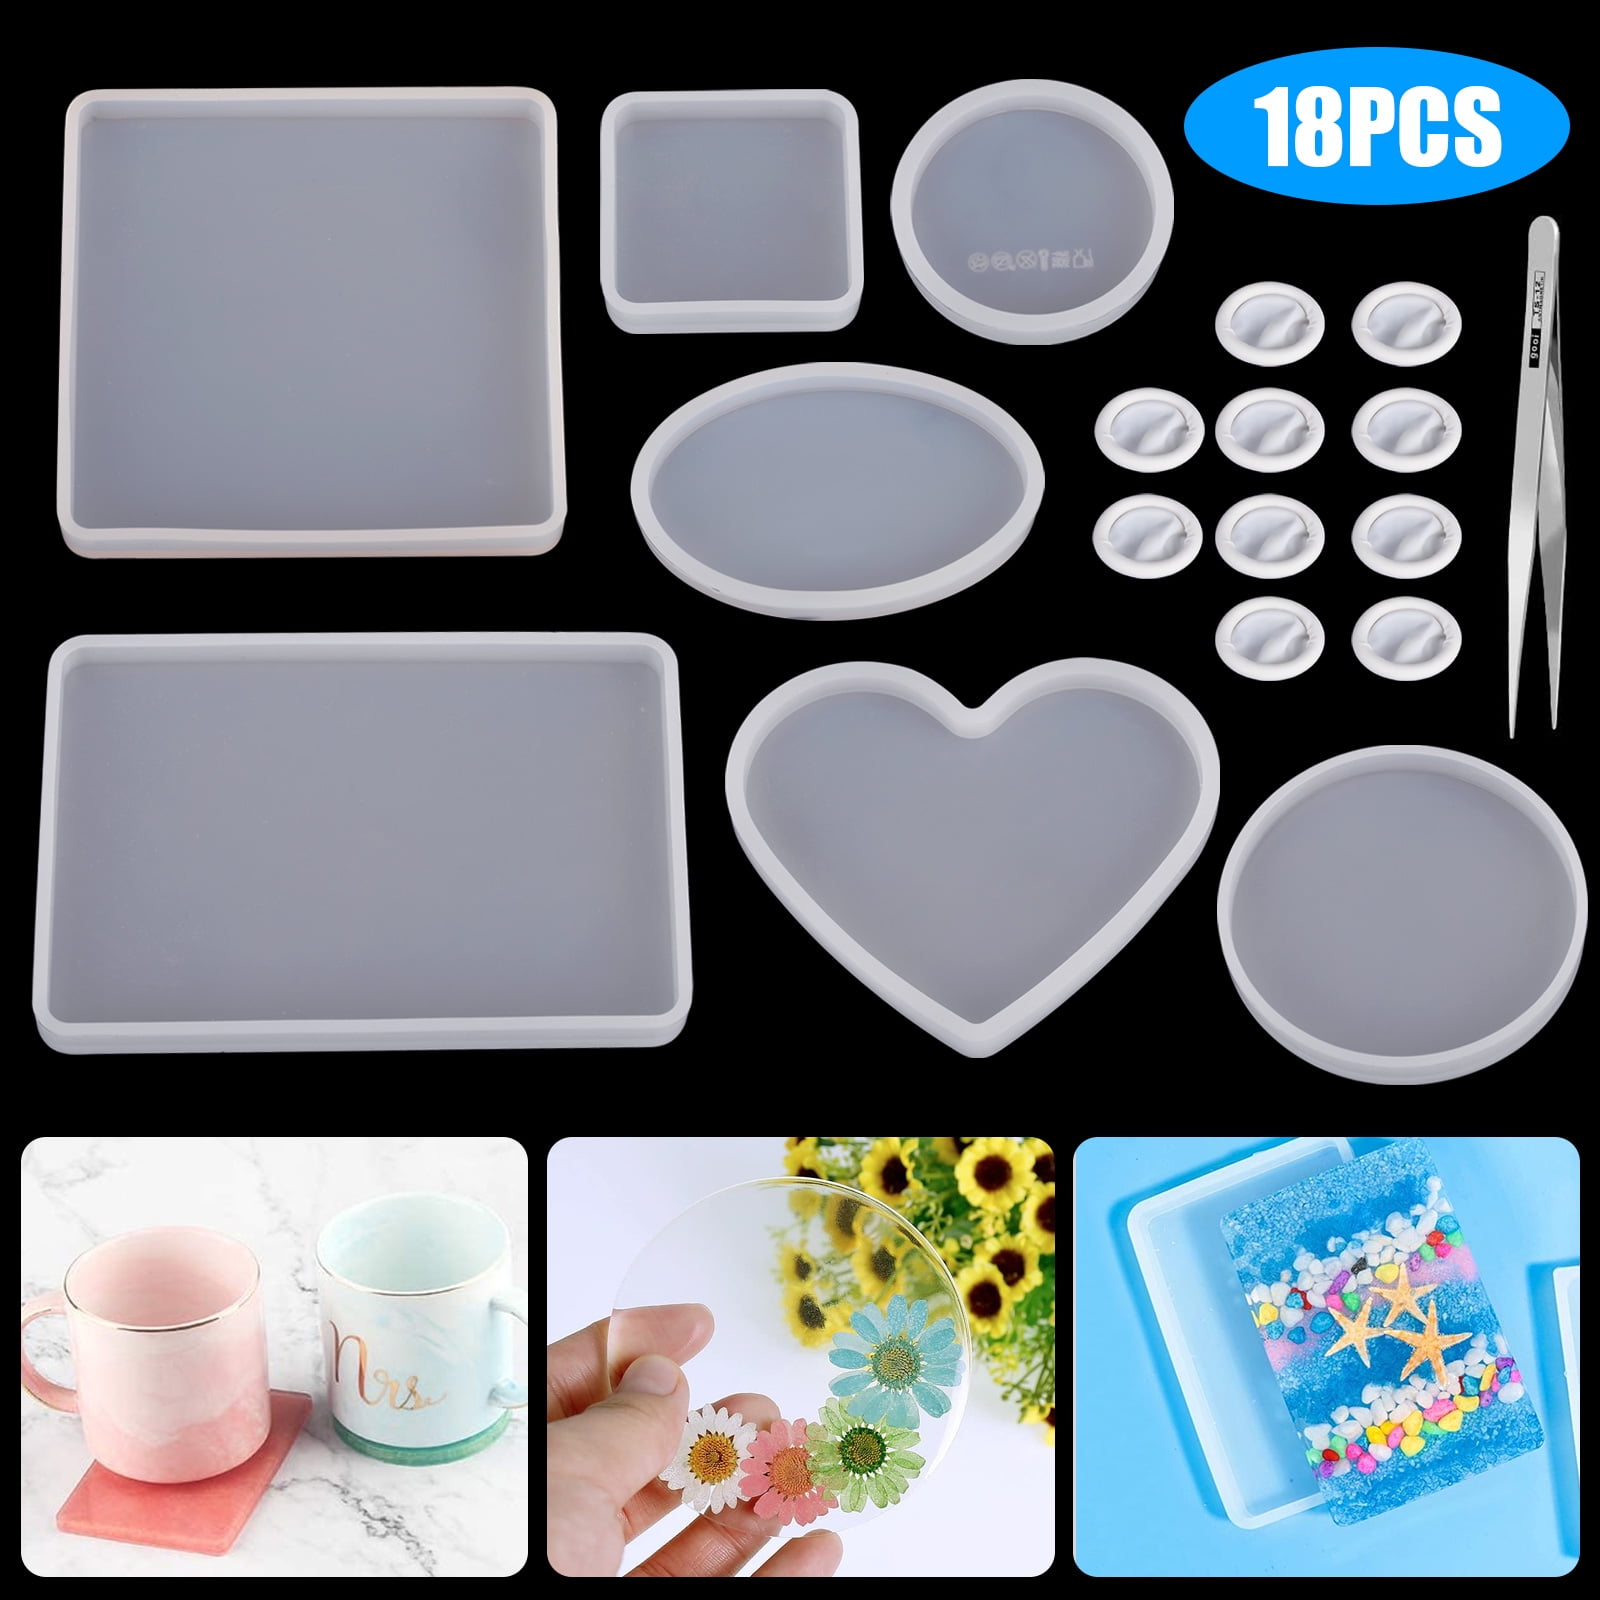 25 Pcs Coaster Molds for Epoxy Silicone Resin Coaster Molds Set with  Storage Box Mold Casting Mold for DIY Cups Mats Art Craft Home Decoration,  5